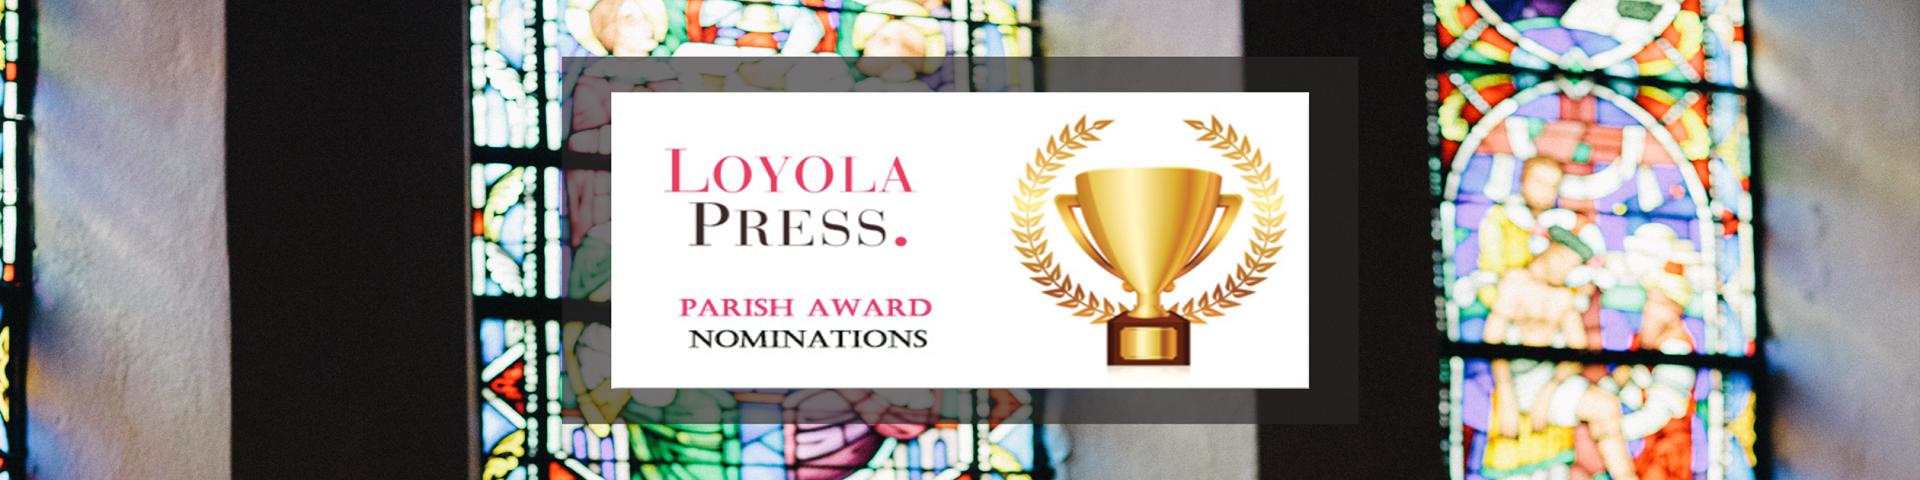 Loyola Press Award superimposed over stained glass